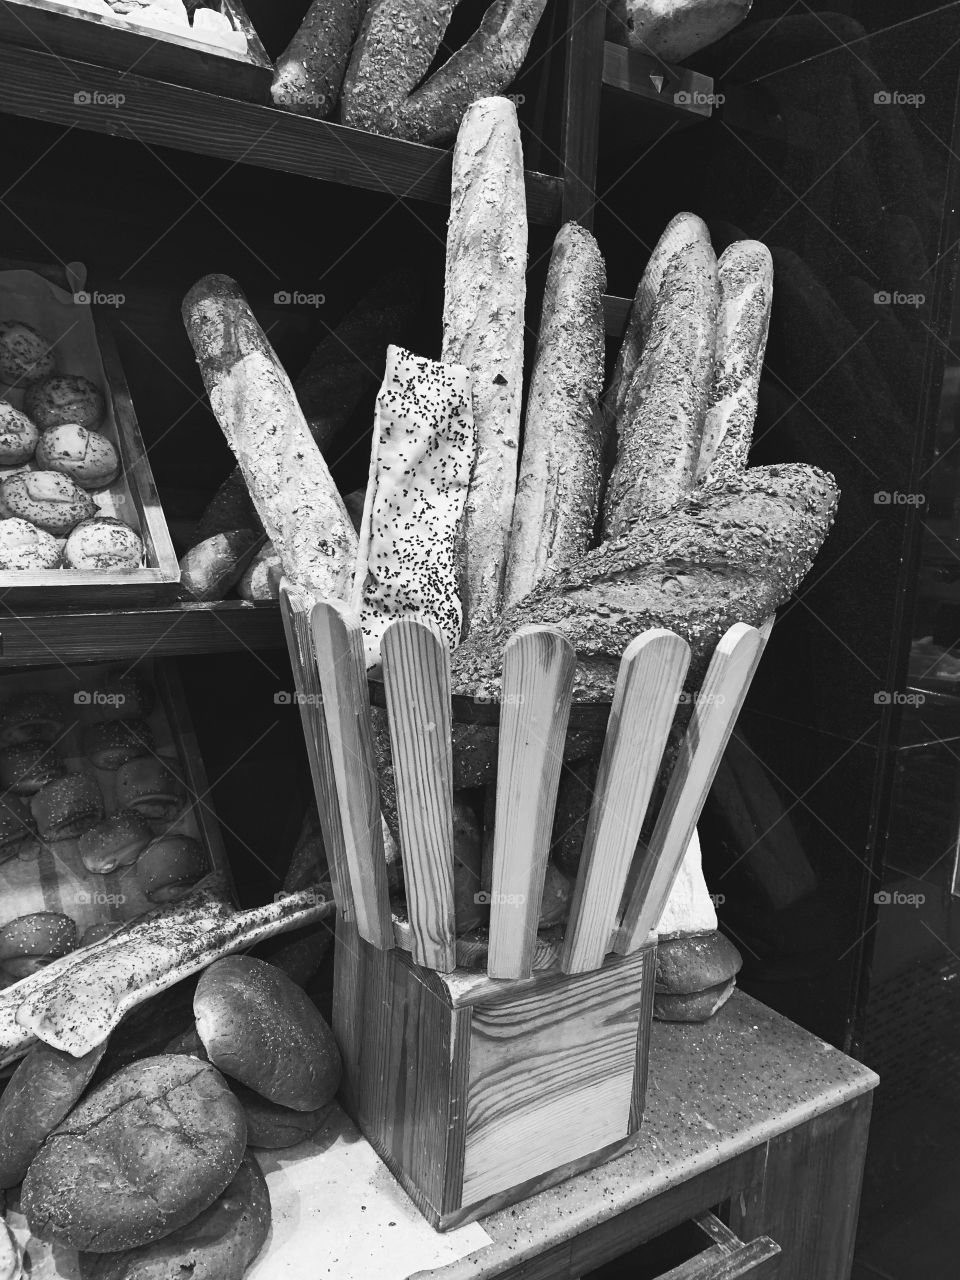 Bunch of breads in a wooden basket in a bakery store in black and white 